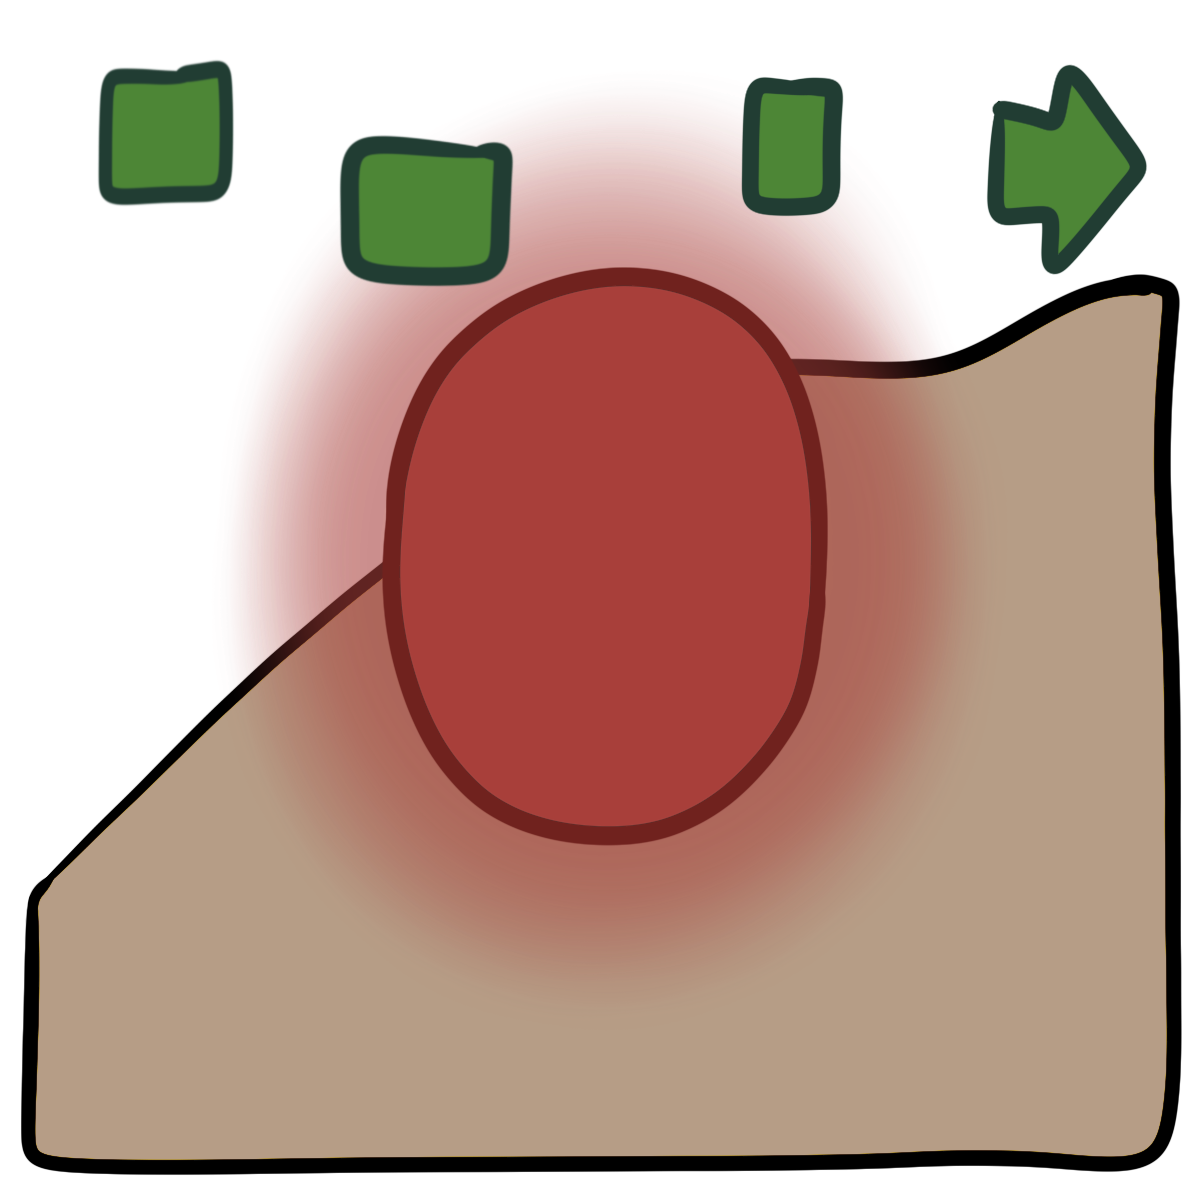 A green arrow pointing right is broken into four offset sections with large gaps between them. There is a red glowing oval in the center. Curved beige skin fills the bottom half of the background.